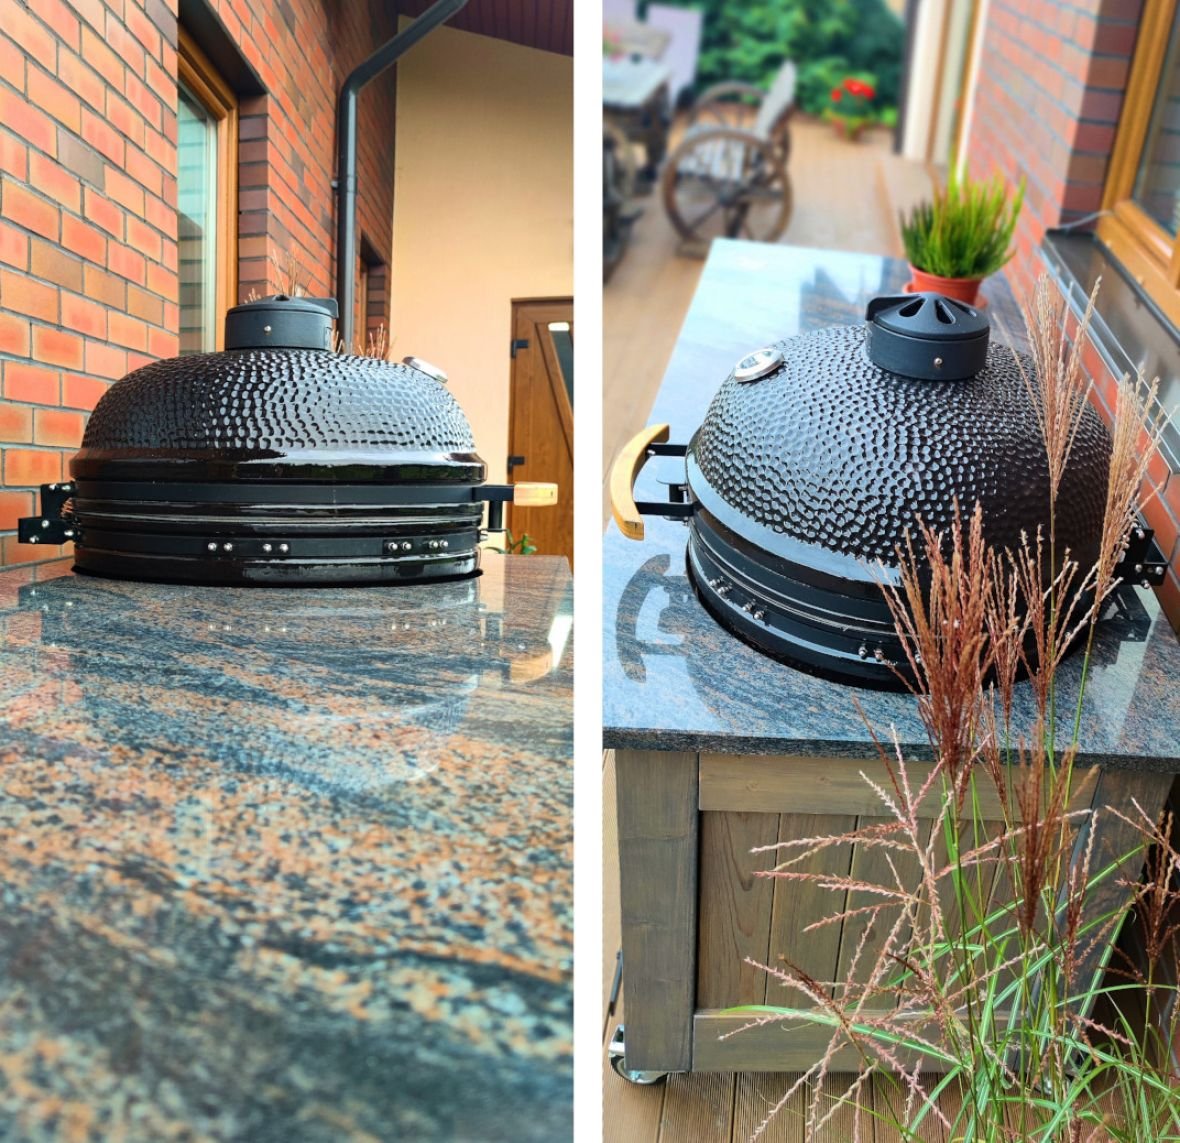 Granite stone table top with an opening for „Kamado“ barbecue